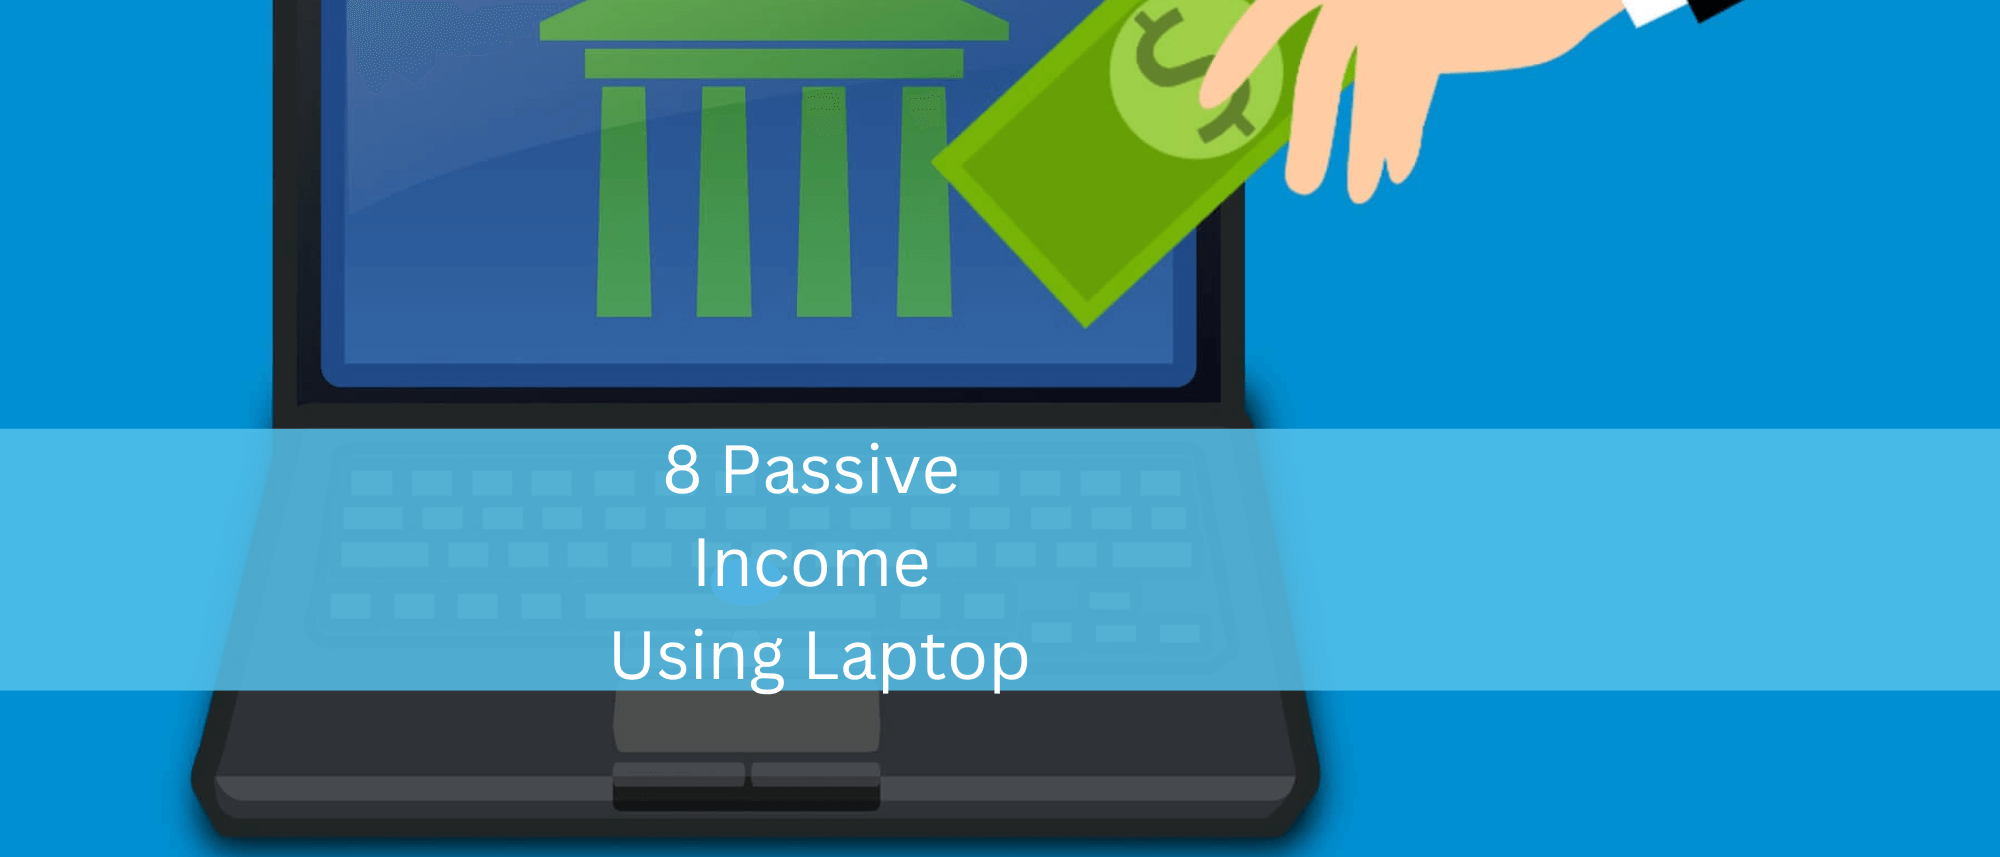 Knowing the 8 Passive Income using Laptop